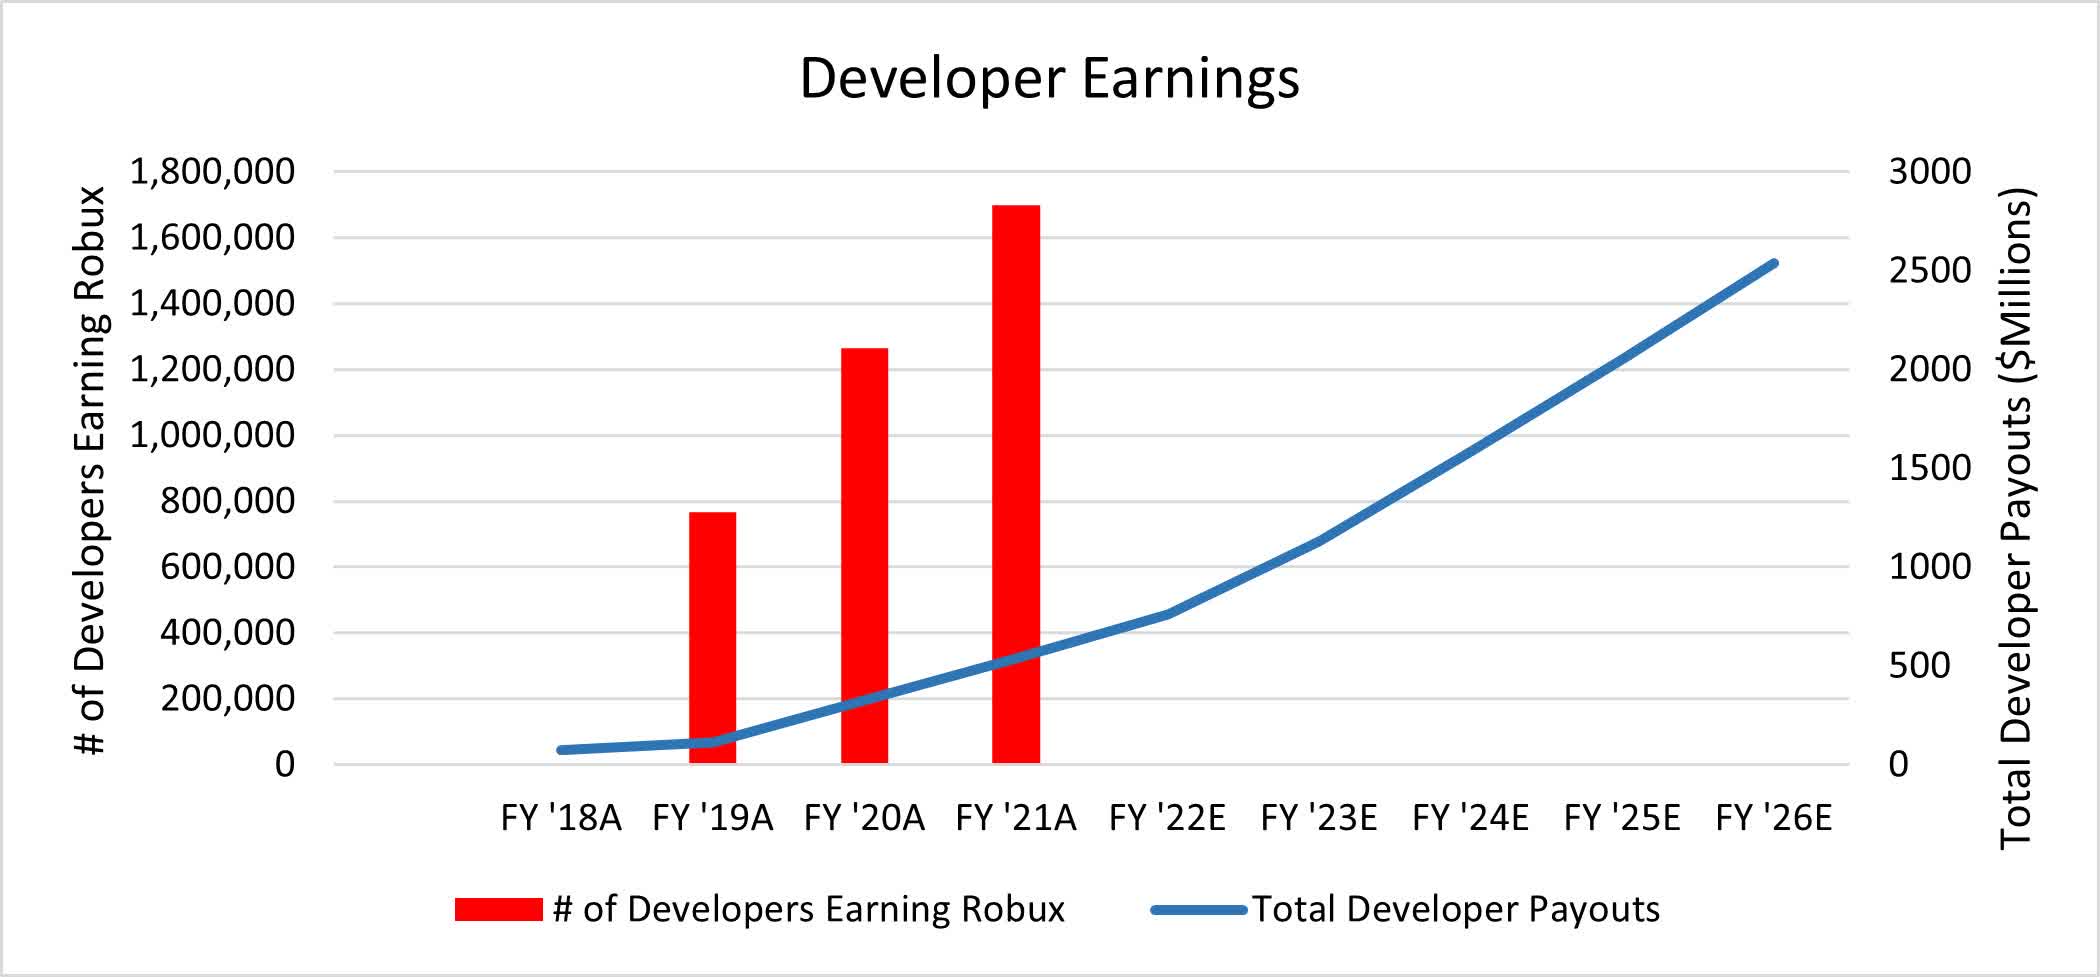 Roblox (RBLX) Earnings Miss Estimates on a Drop in Player Spending -  Bloomberg